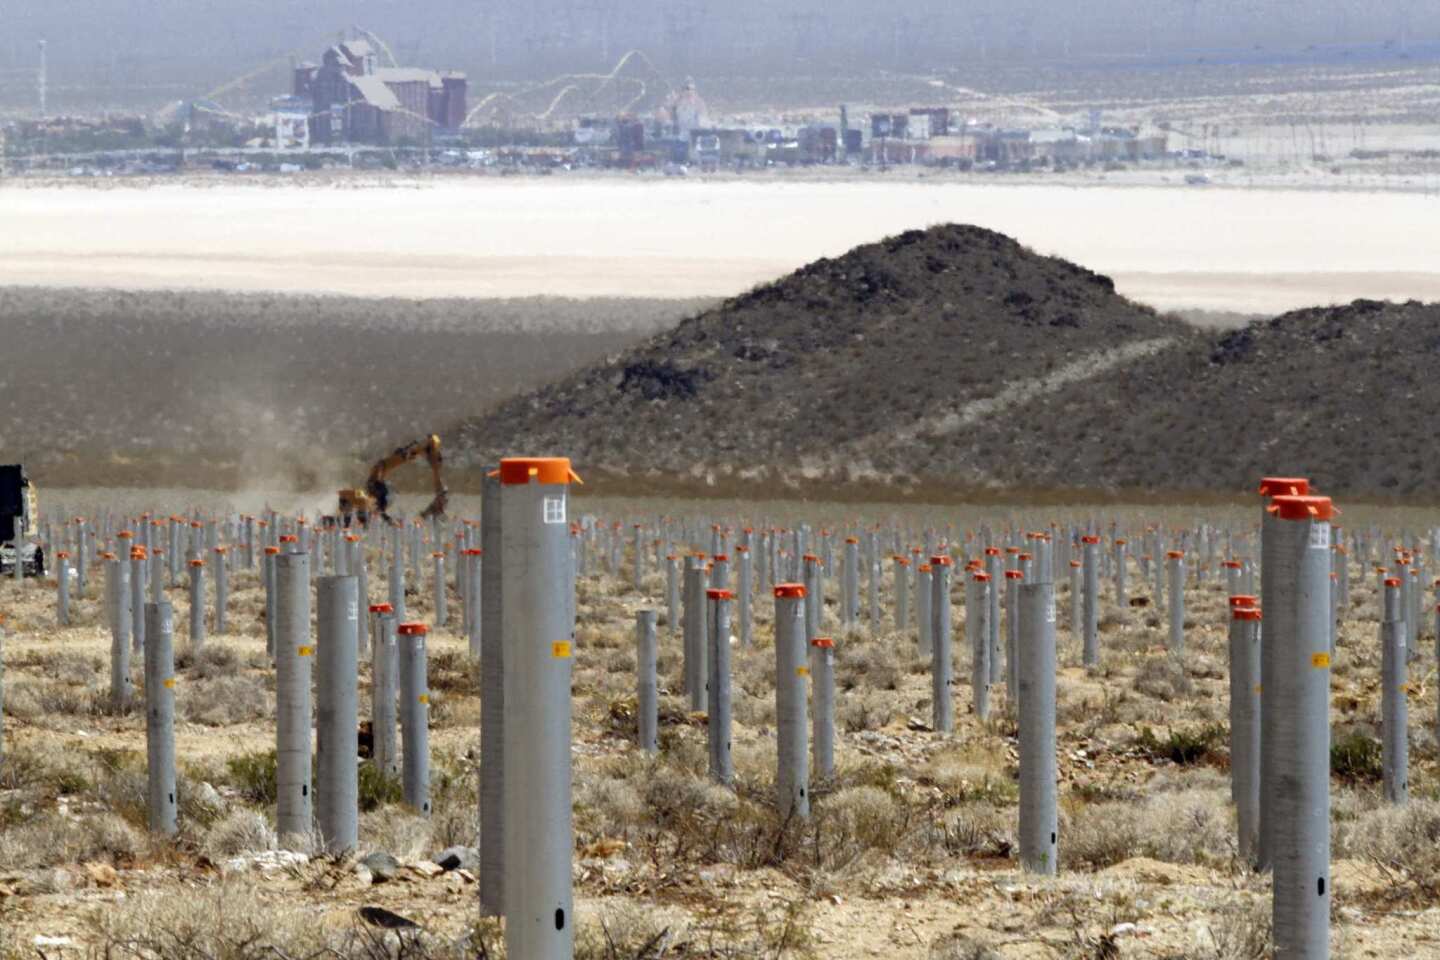 The casinos and shopping center at the Nevada state line provide the background for the posts that will support the mirror structures, called heliostats, at the solar plant.